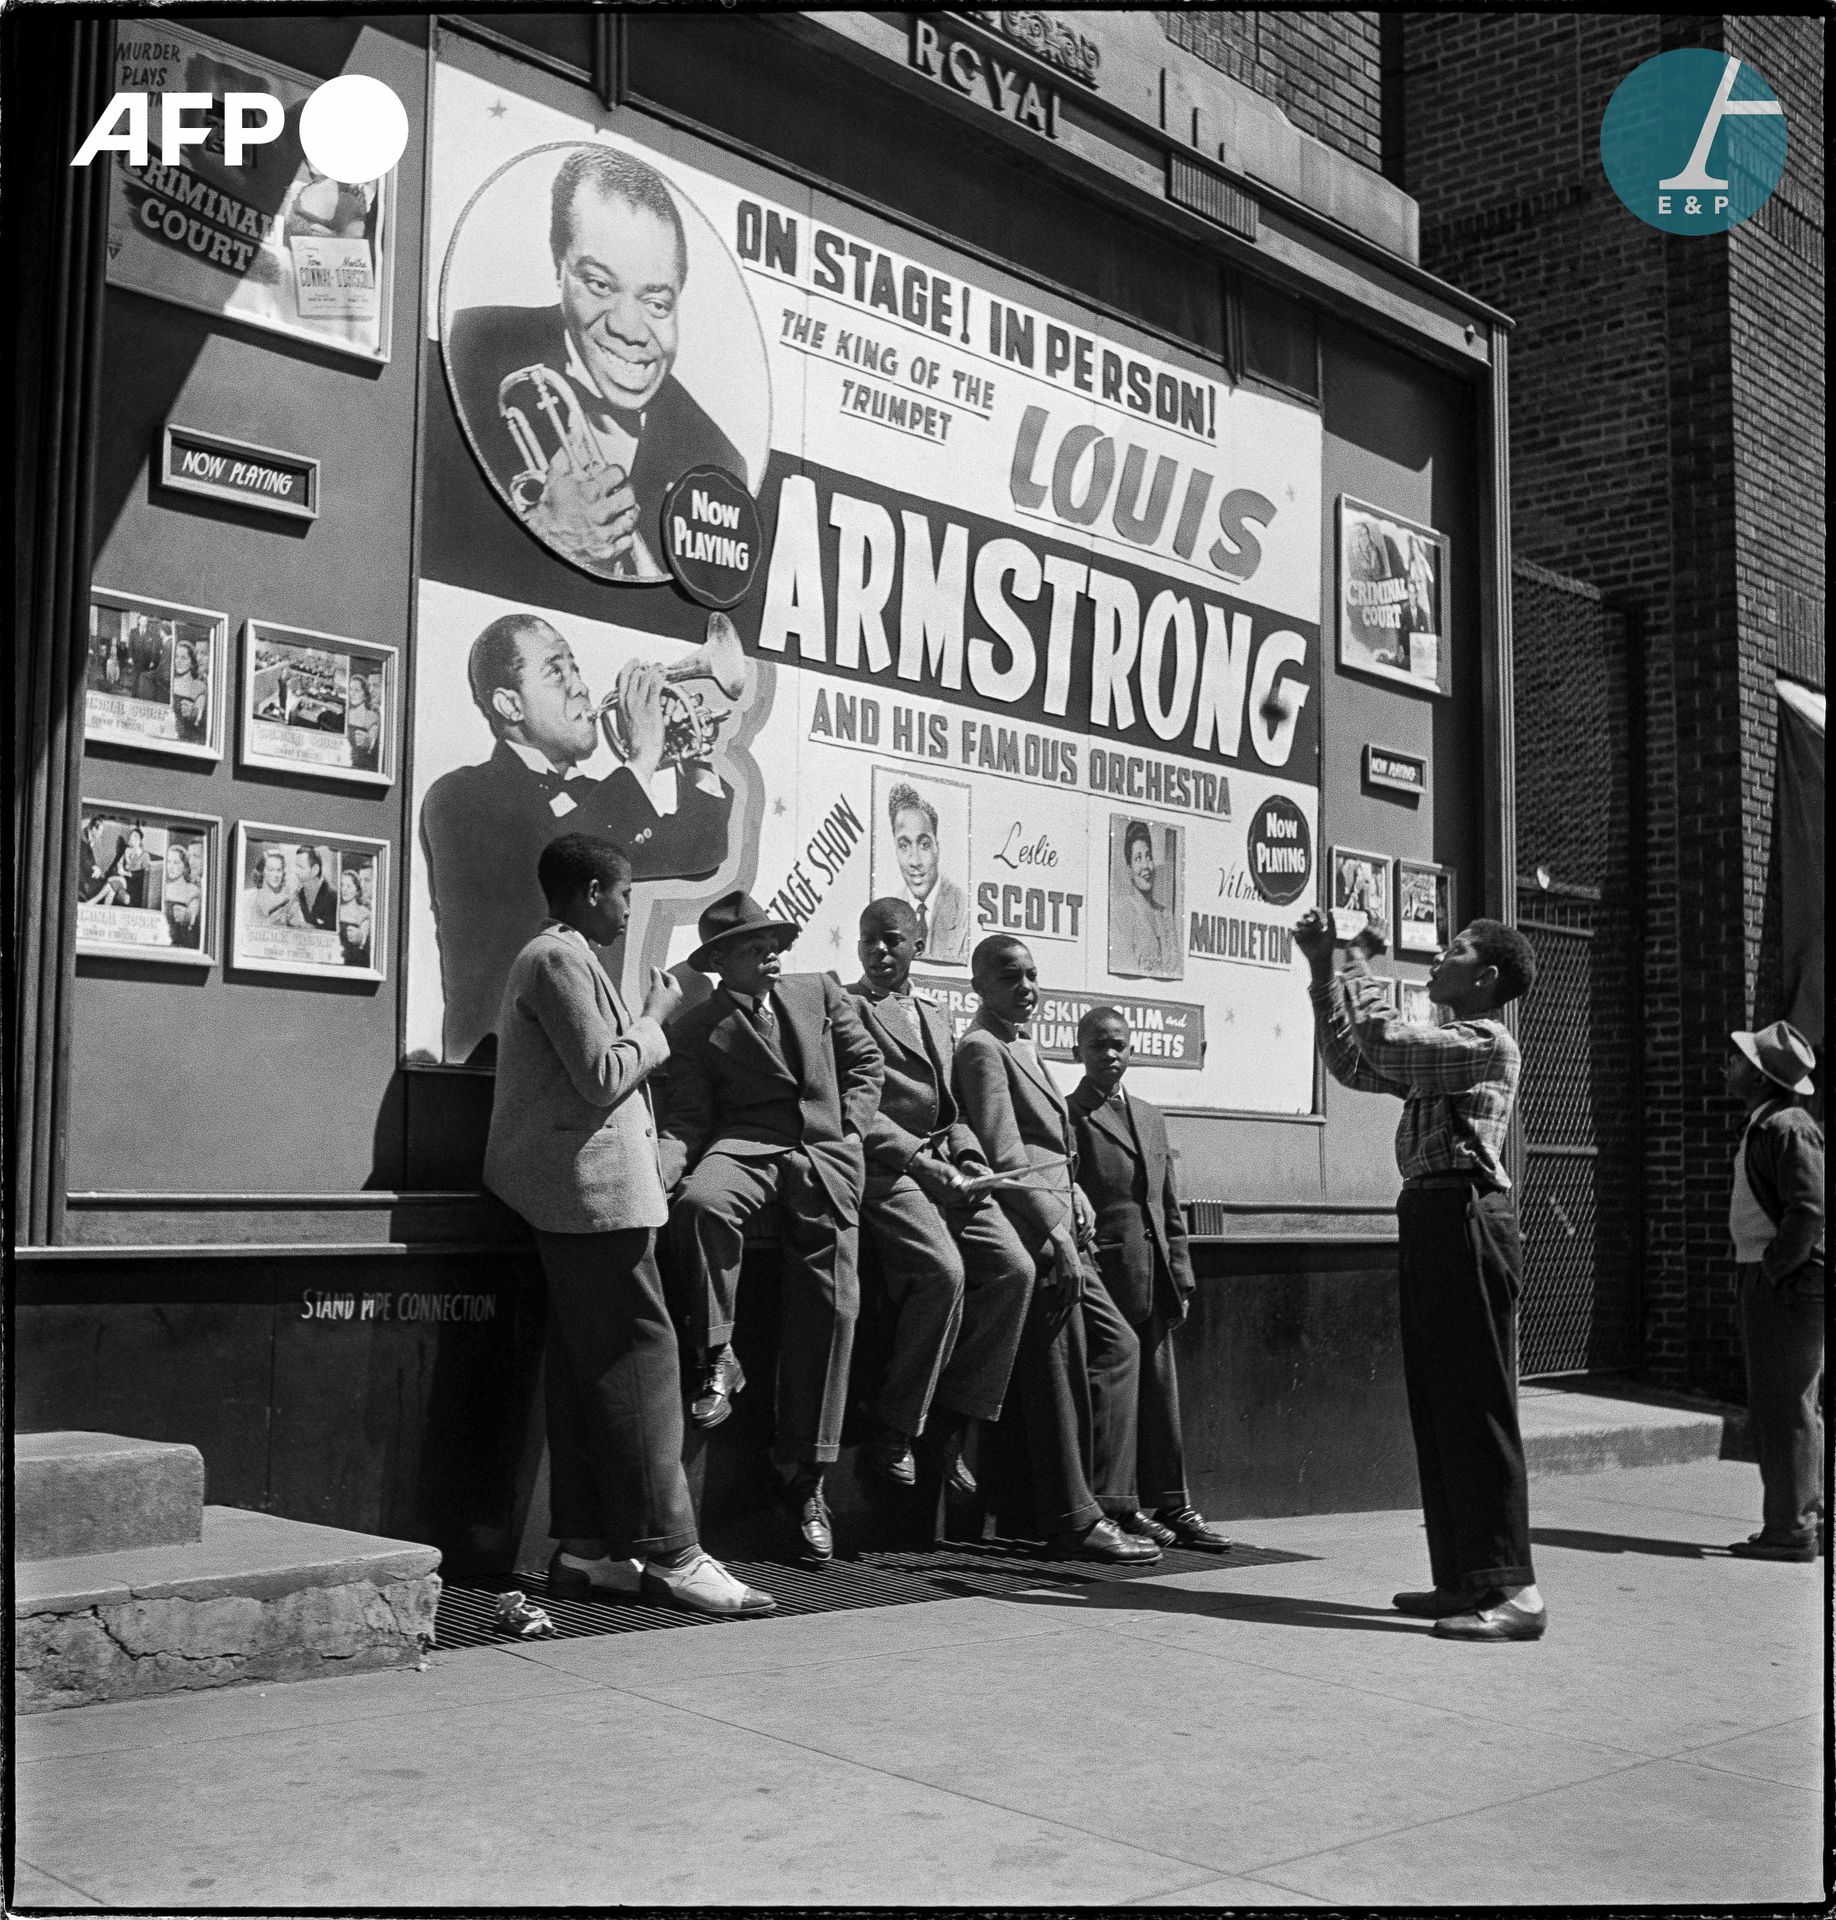 Null 
AFP - Eric SCHWAB




People stand in front of a poster advertising a show&hellip;